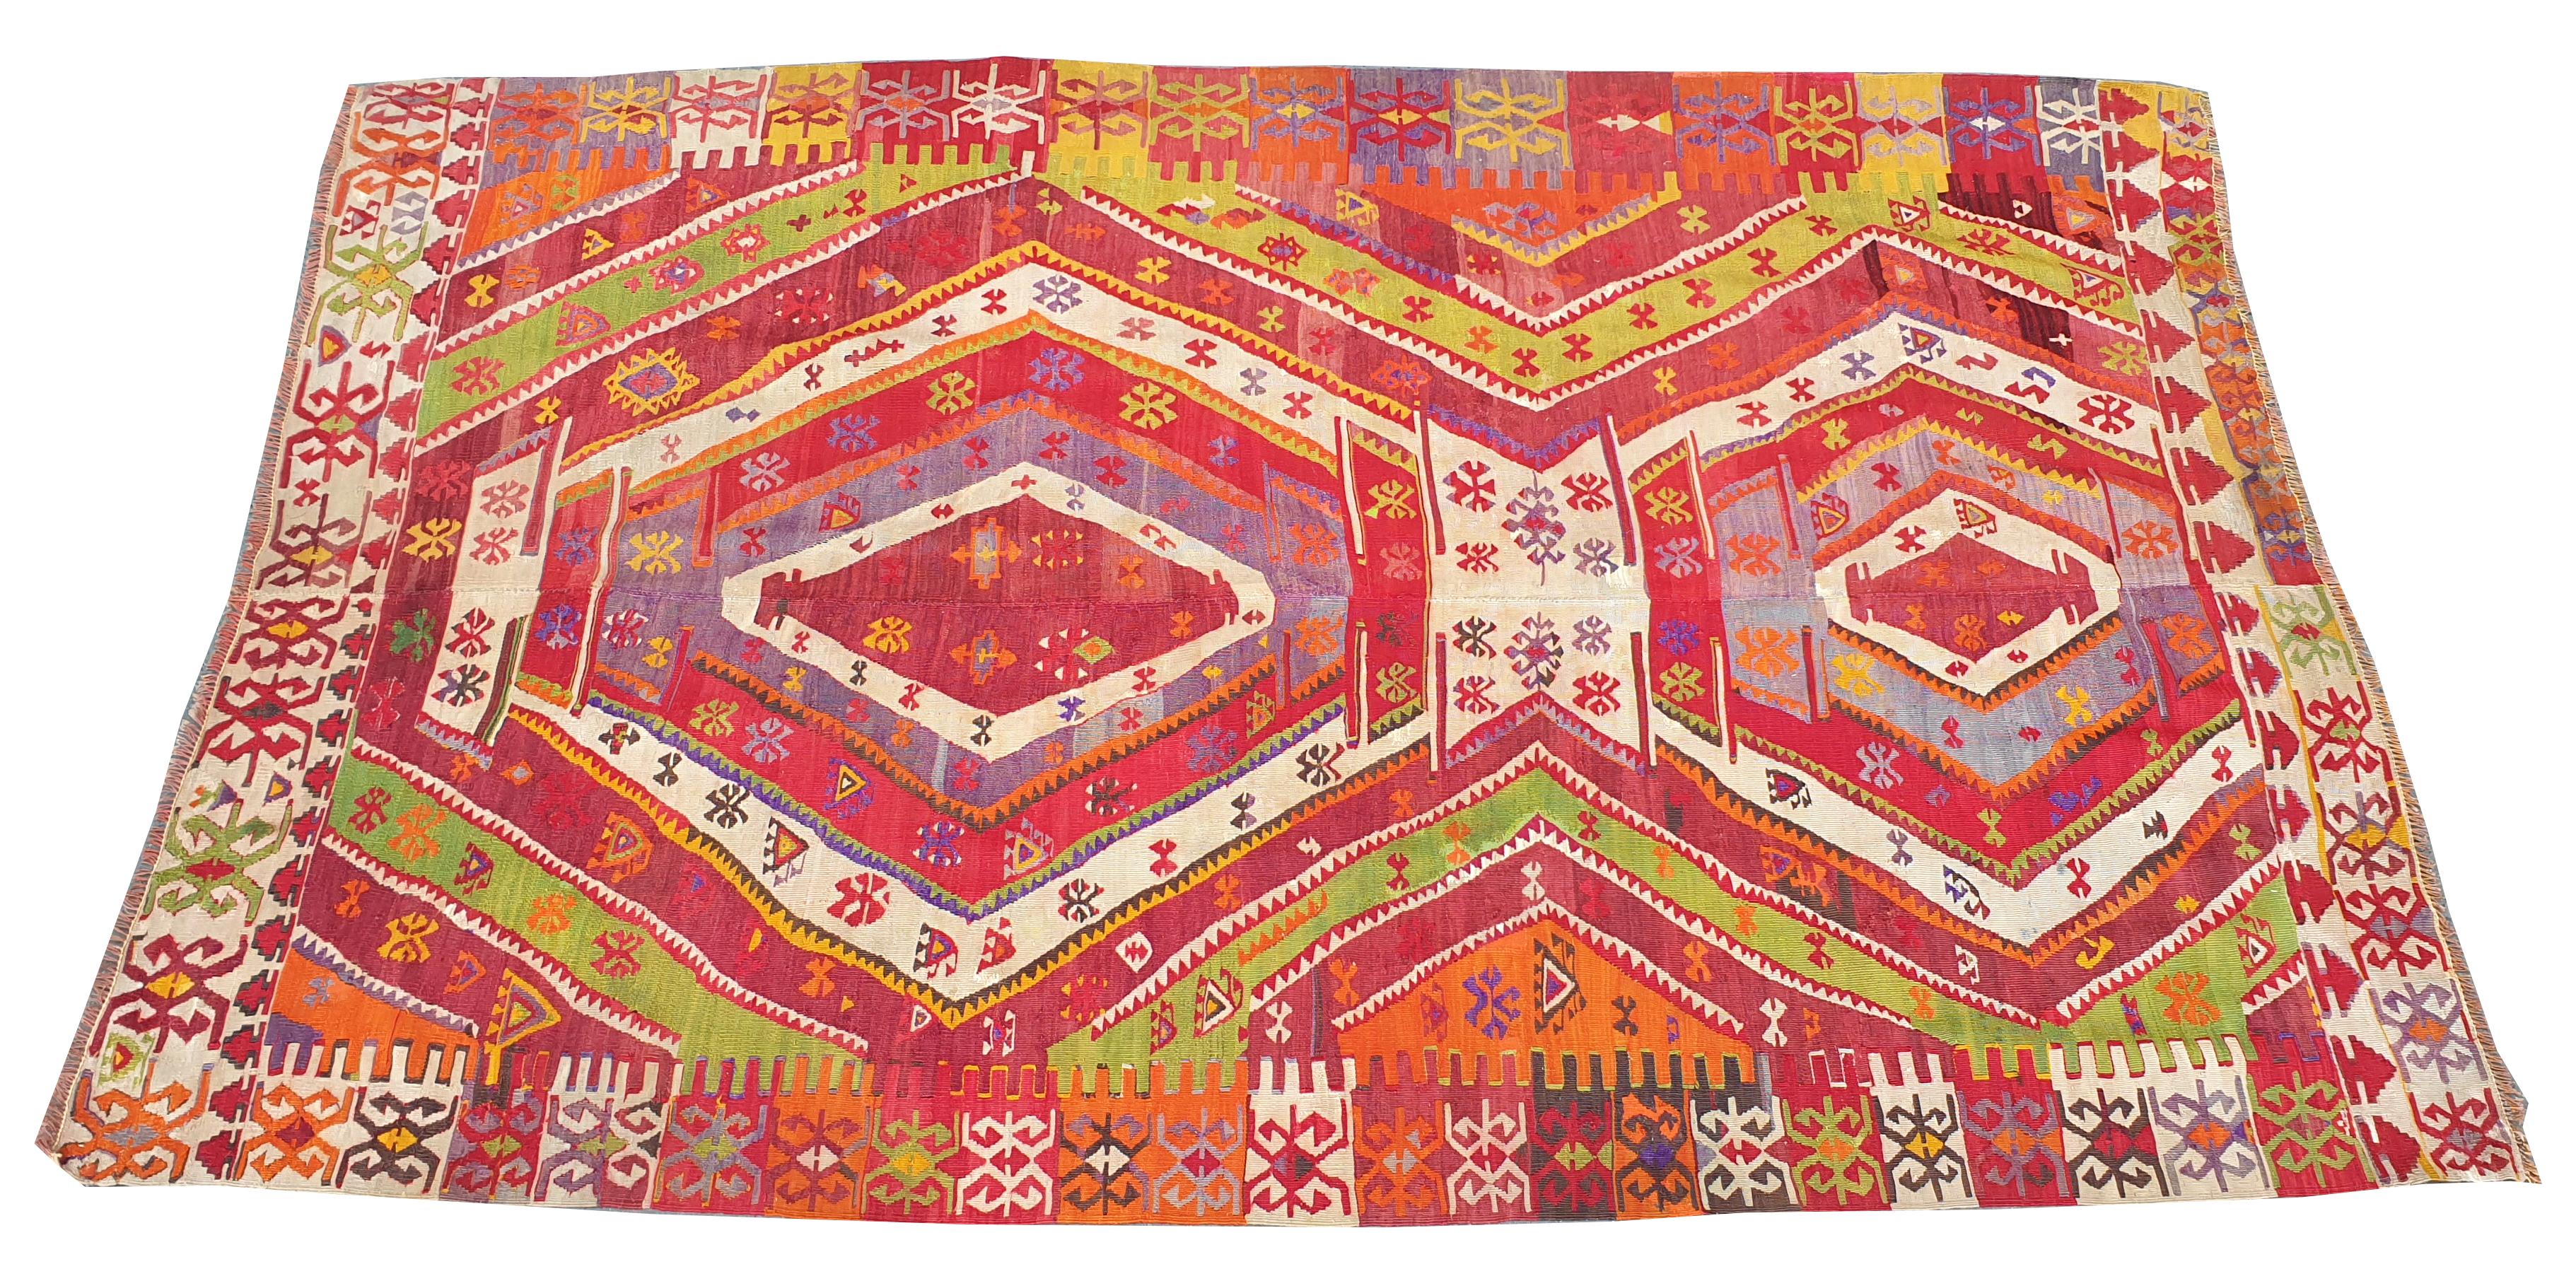 N° 860 - Kilim hand knotted in Turkey in 20th century
High quality, beautiful graphics and remarkable finesse.
Perfect state of preservation.

Measures: 260 x 170 cm.
 